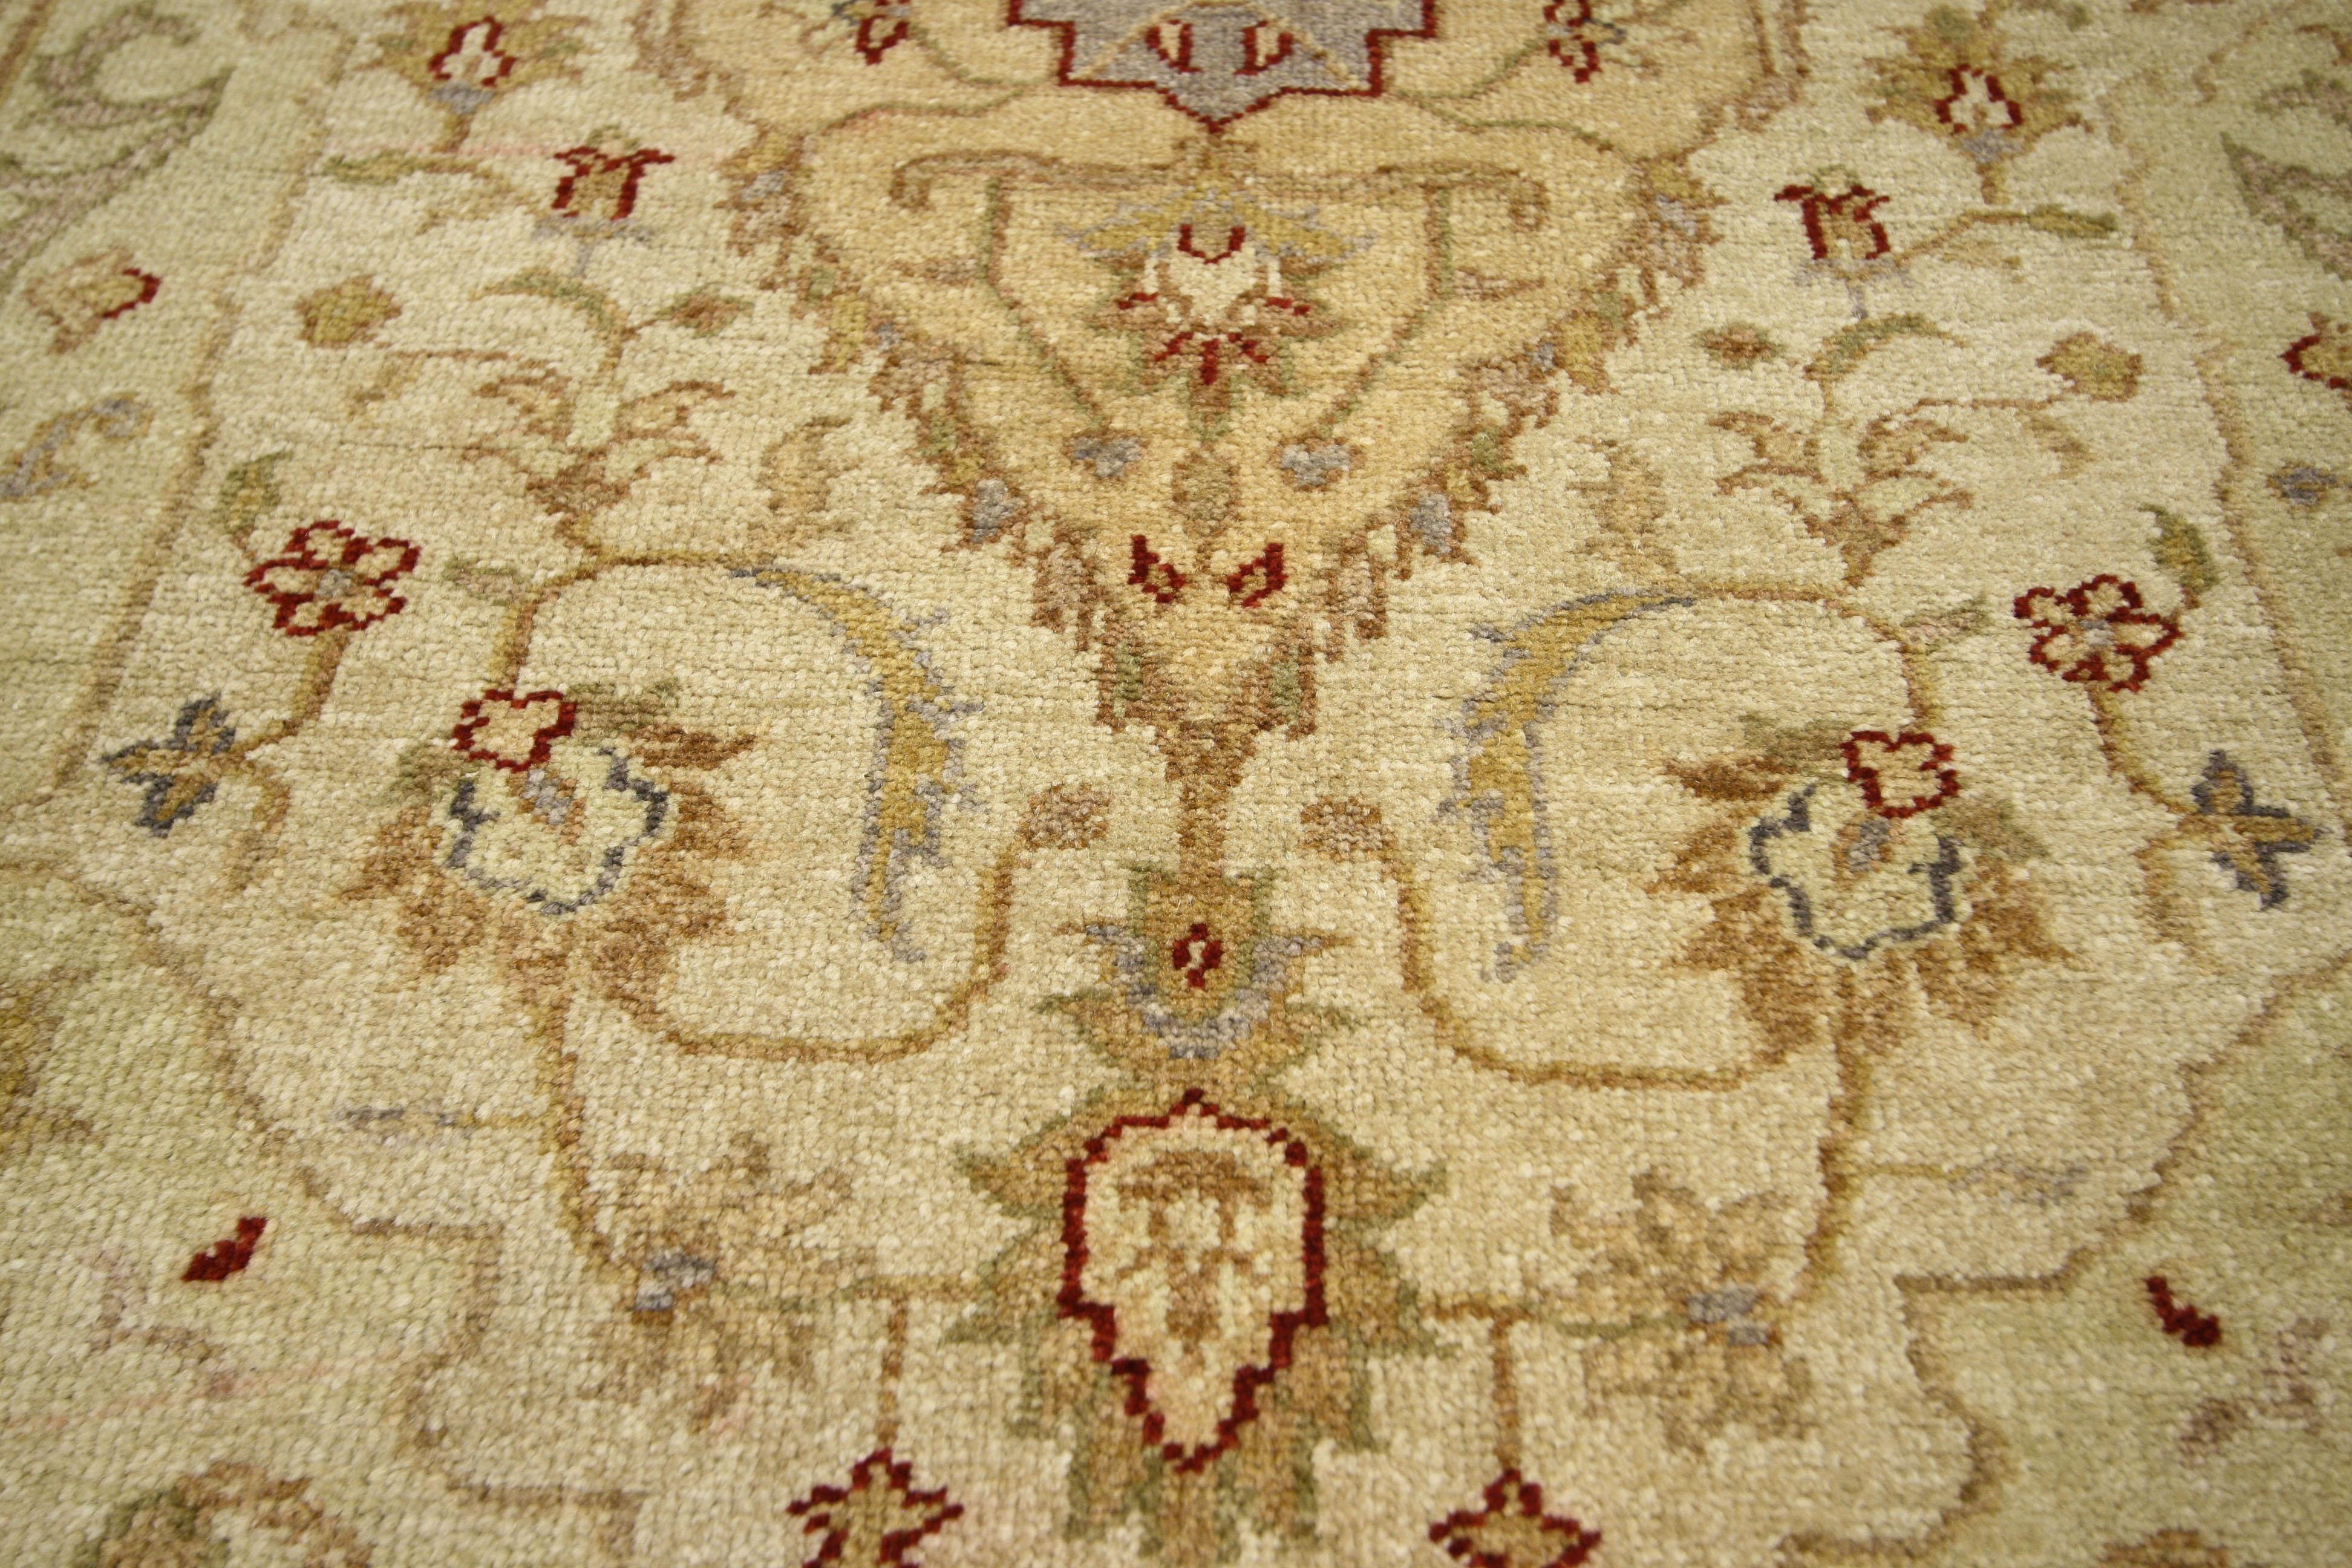 77184, vintage Oushak style rug with traditional design in warm, golden hues. This hand-knotted wool vintage Oushak-style rug features a lozenge-shaped centre medallion with palmette pendants on a champagne field. The centre medallion also contains